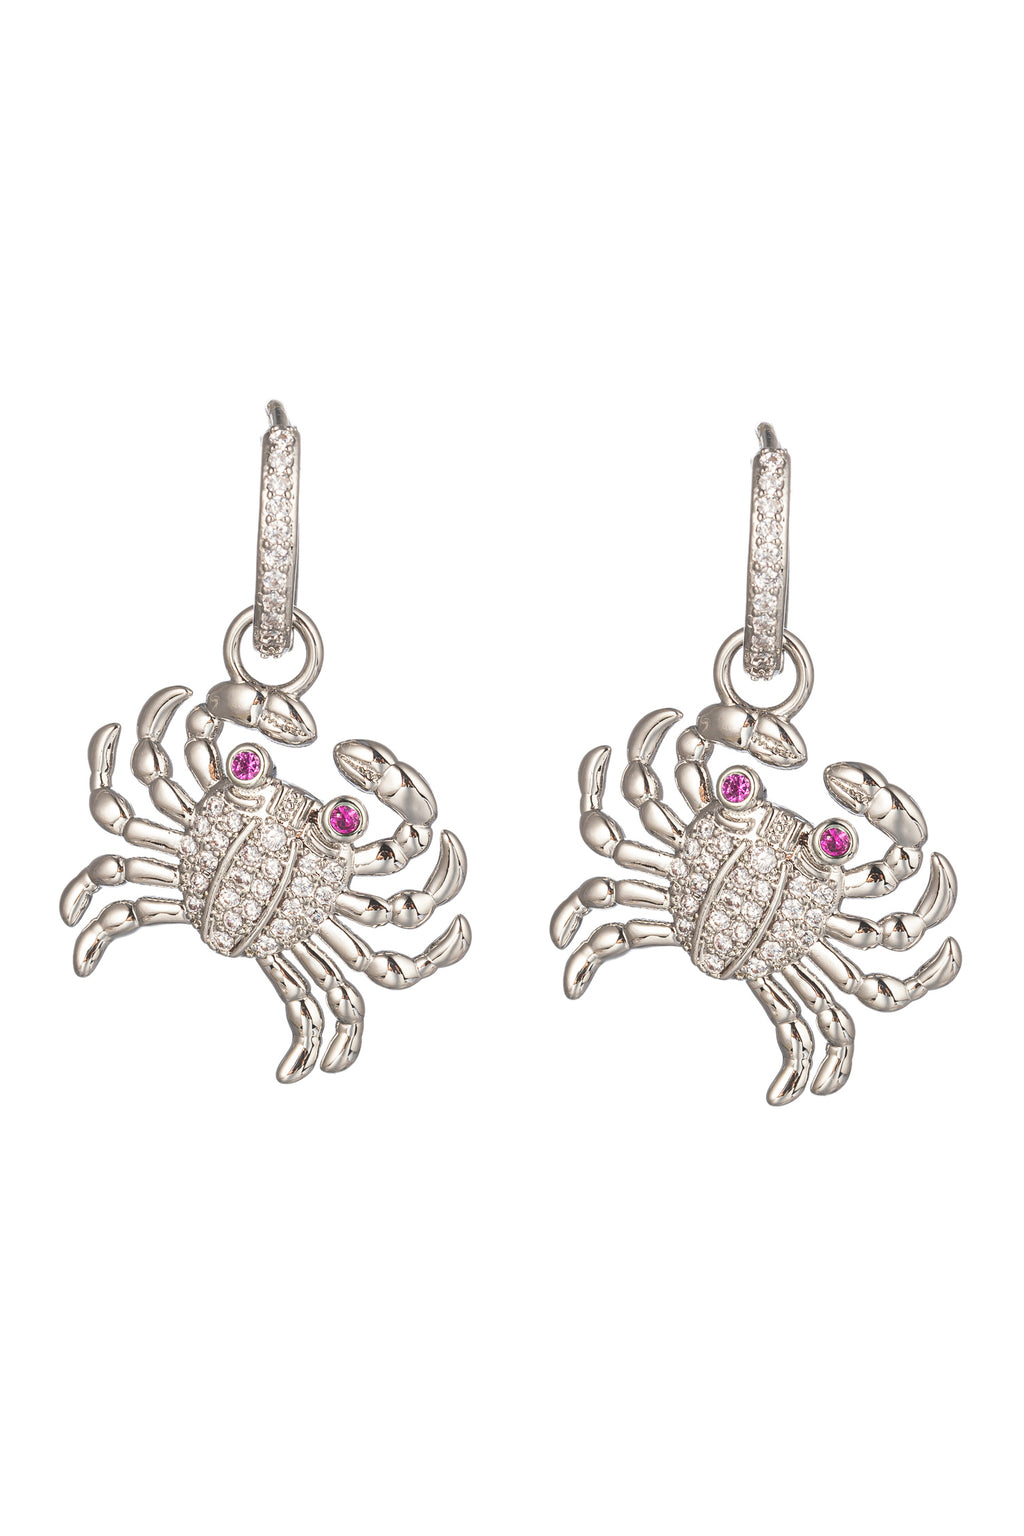 Silver tone bras crab huggie earrings studded with CZ crystals. 